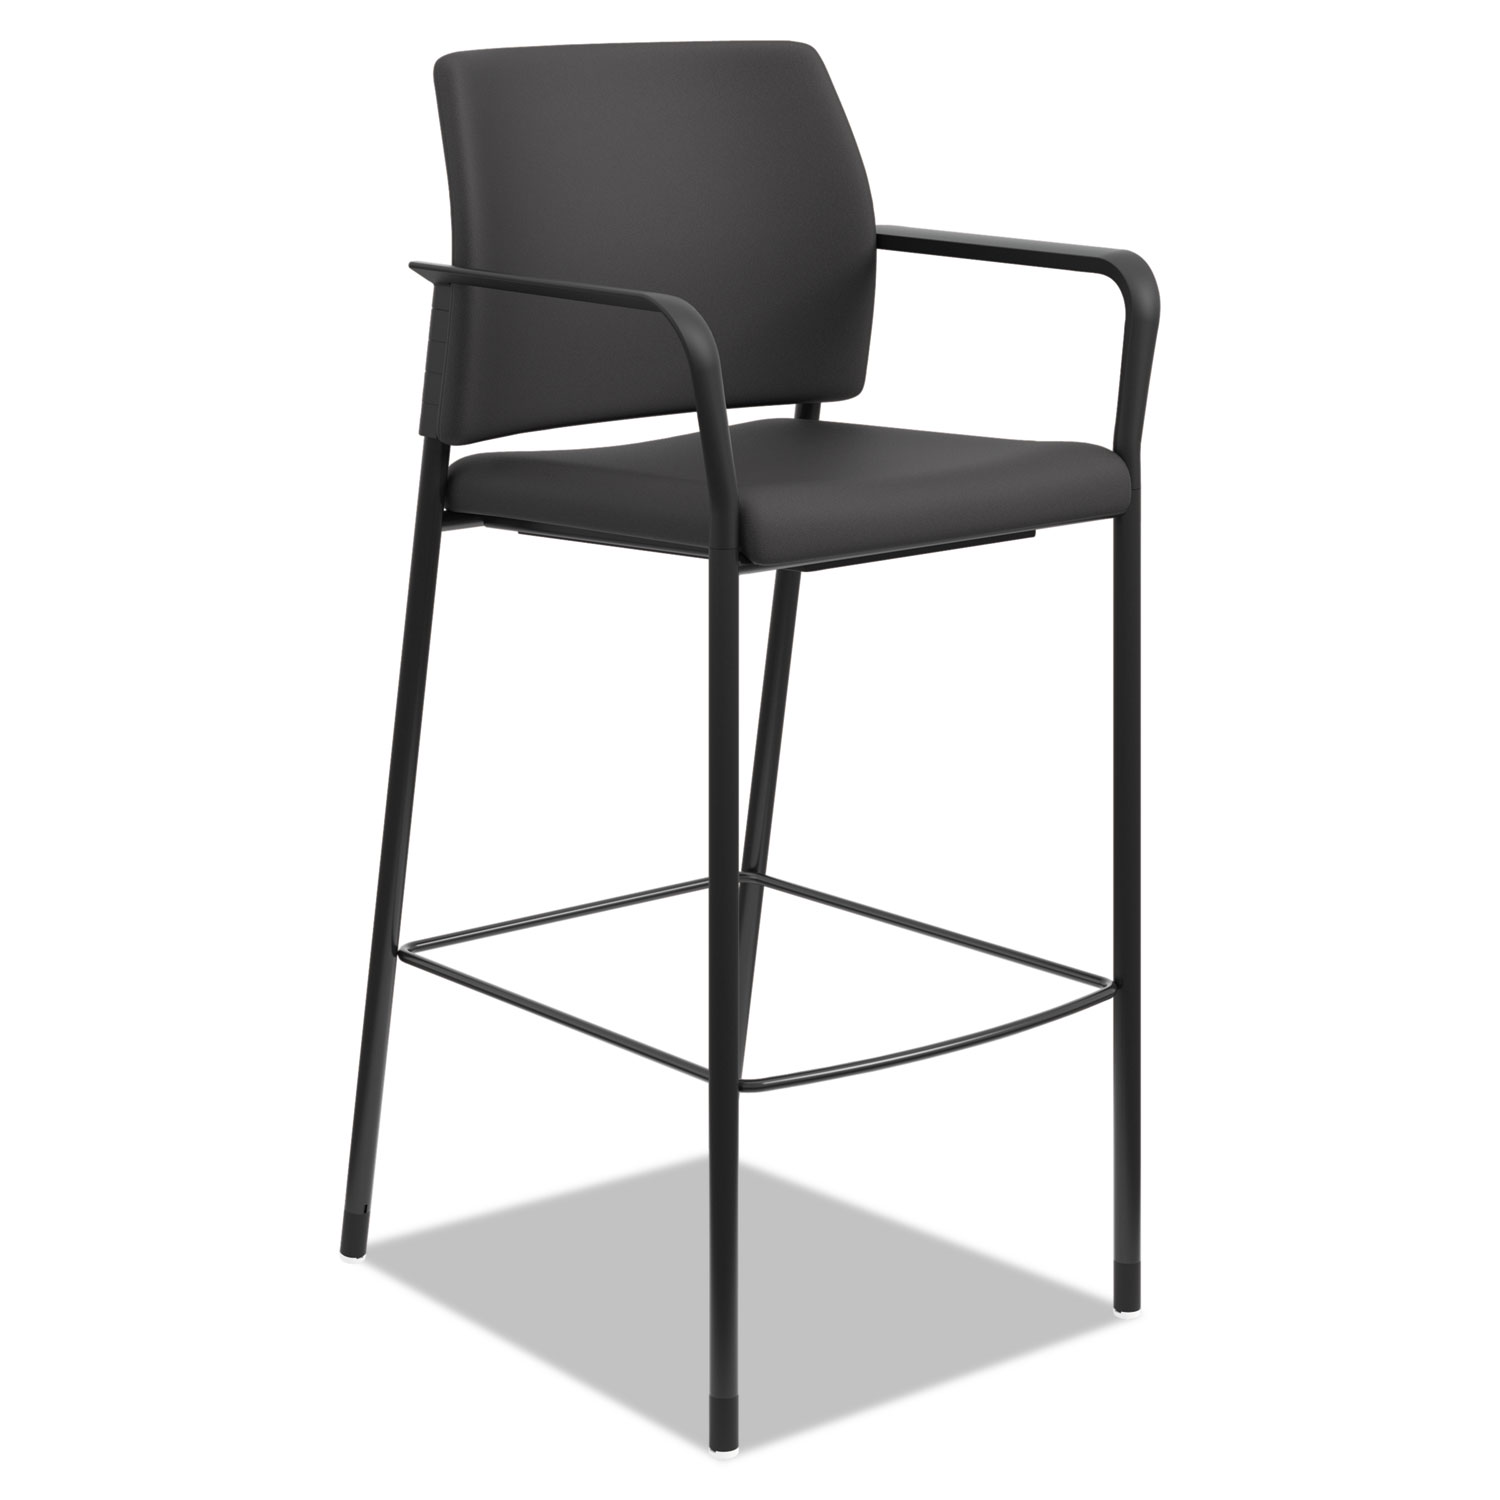 Accommodate™ Series Café Stool with Fixed Arms, Black Fabric